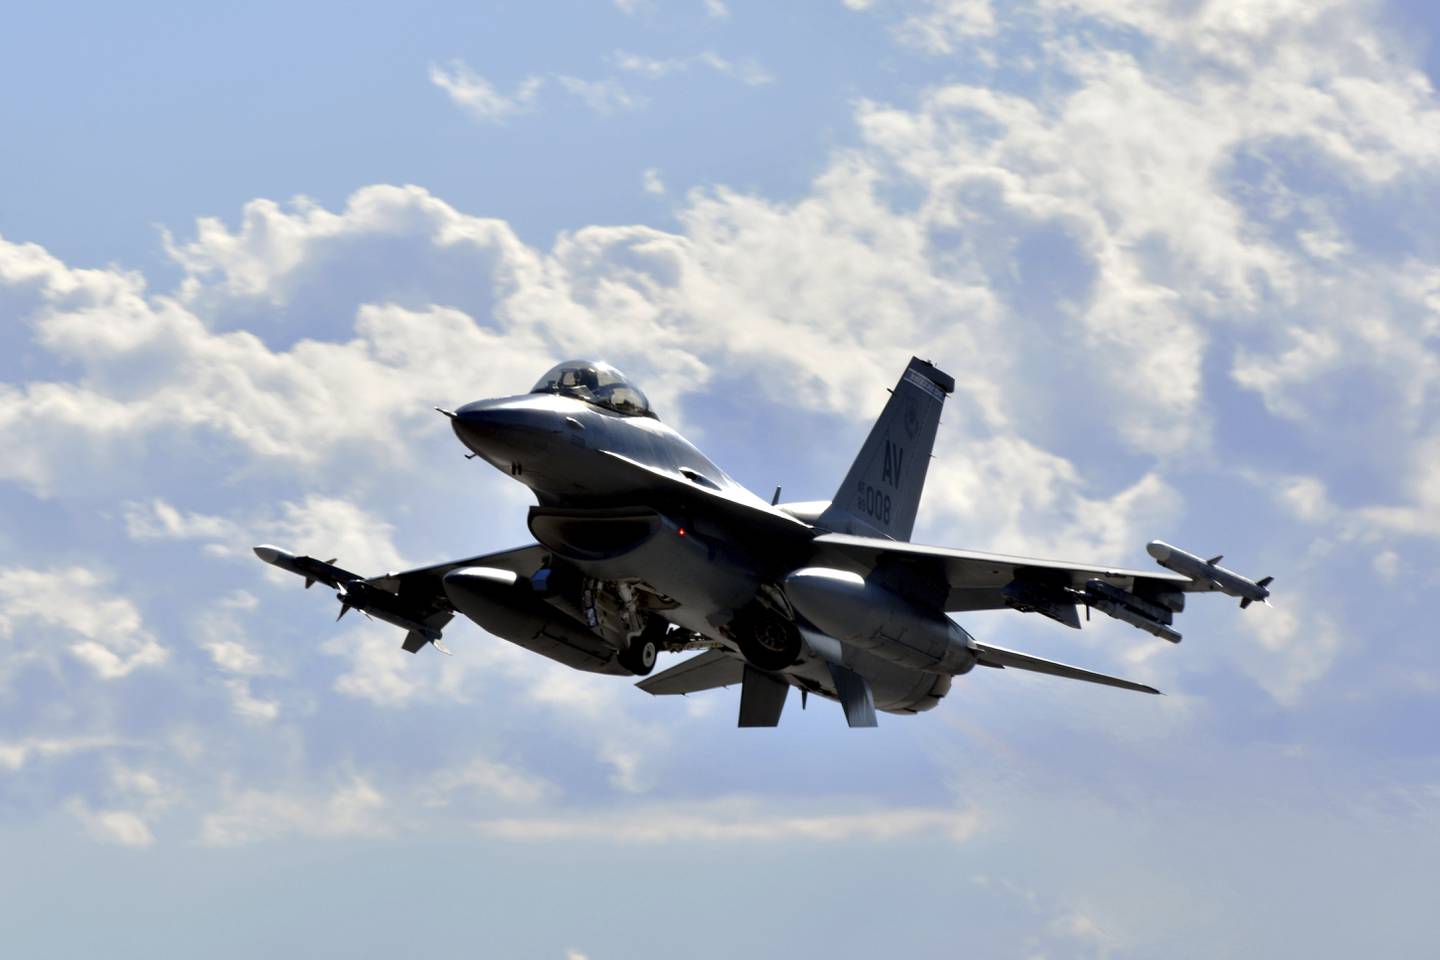 This image provided by the U.S. Air Force, a F-16 Fighting Falcon from the 510th Fighter Squadron takes off during Red Flag 24-1 at Nellis Air Force Base, Nevada, on Jan 25, 2024. The Biden administration has approved the sale of F-16 fighters jets to Turkey following the Turkish government's ratification this week of Sweden's membership in NATO. (Staff Sgt. Heather Ley/U.S. Air Force via AP)